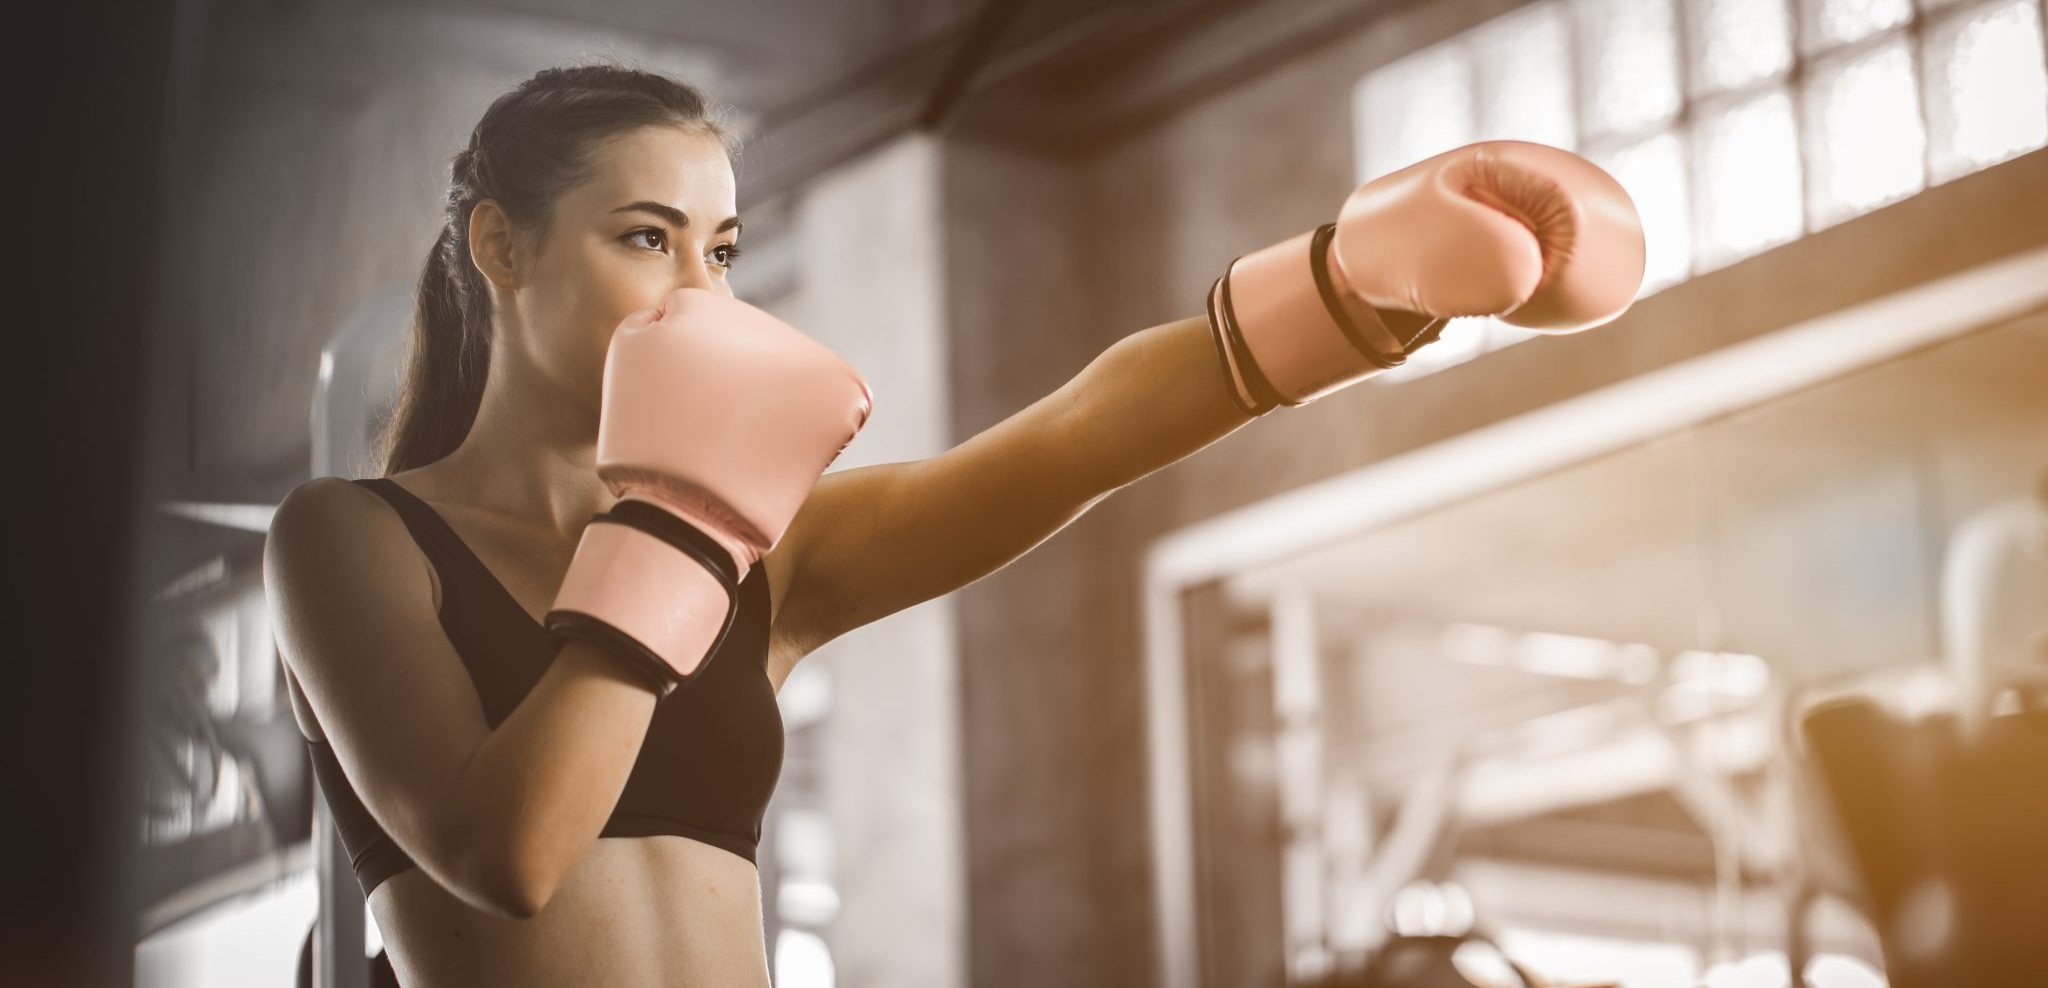 Cardio Kickboxing: Reasons to Try and Love it